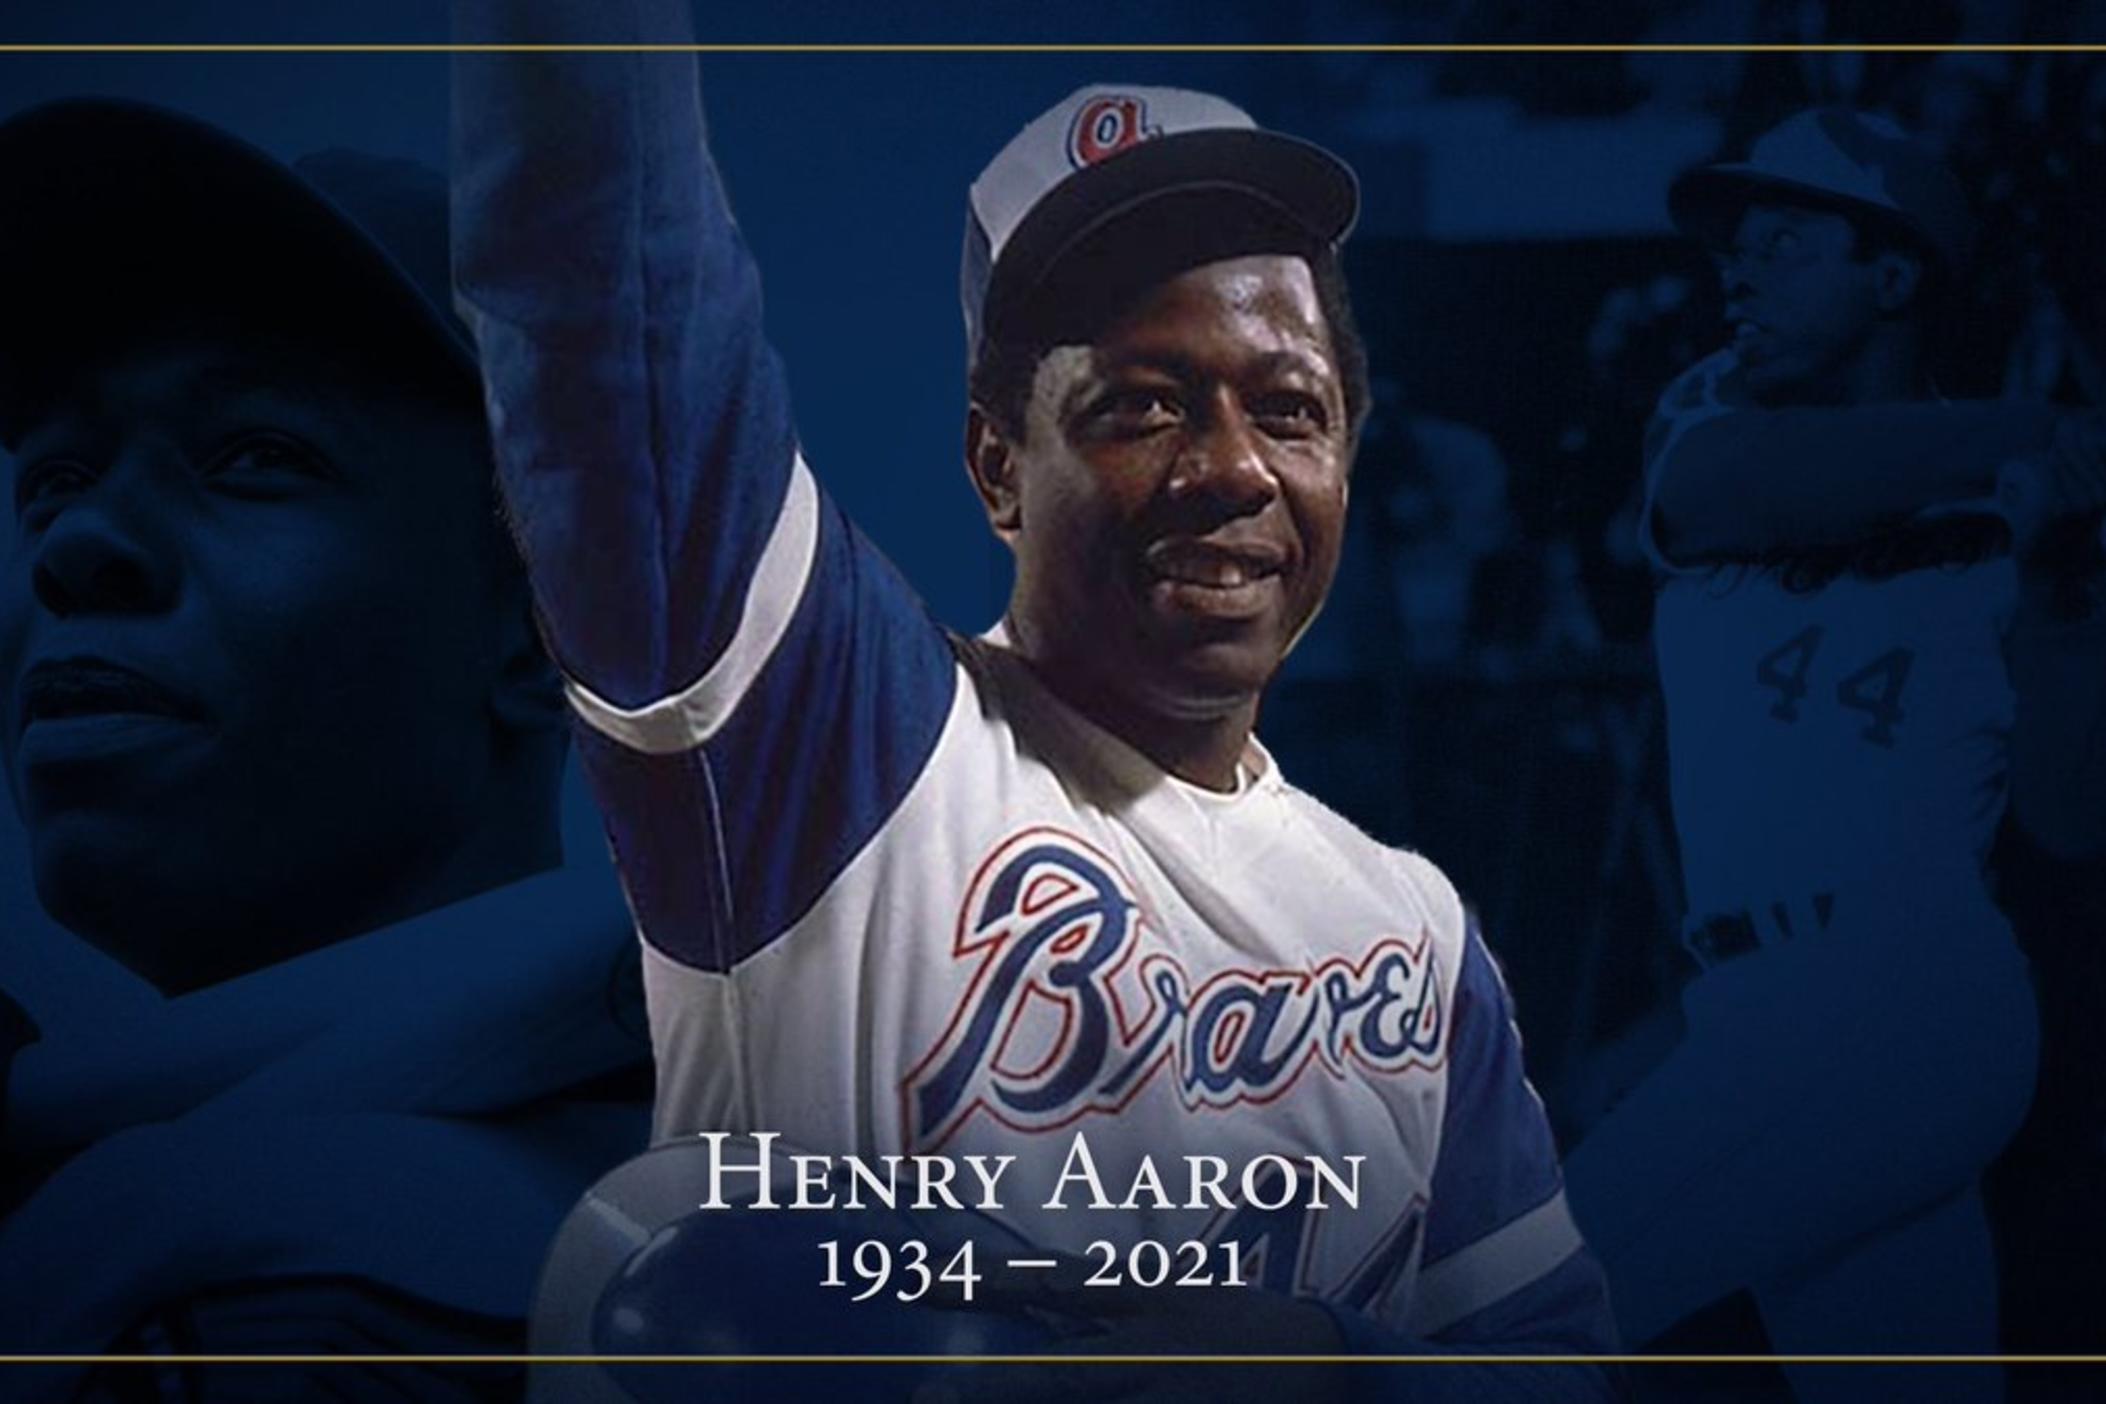 The Great Hank Aaron! He started his career in Milwaukee with the